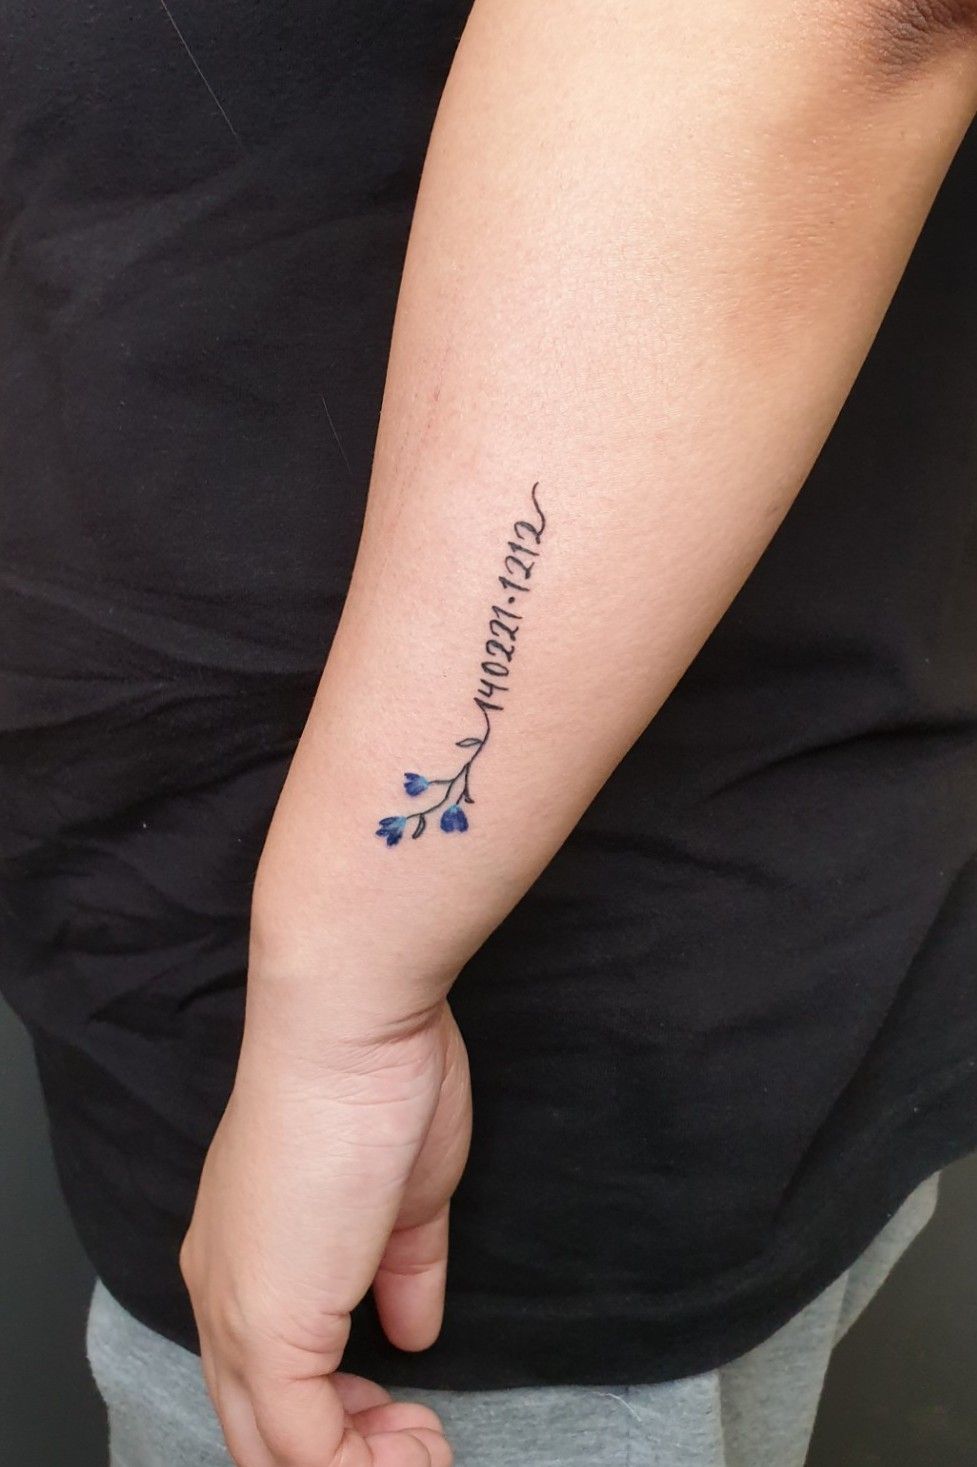 birth date and death date sleeve tattoo｜TikTok Search